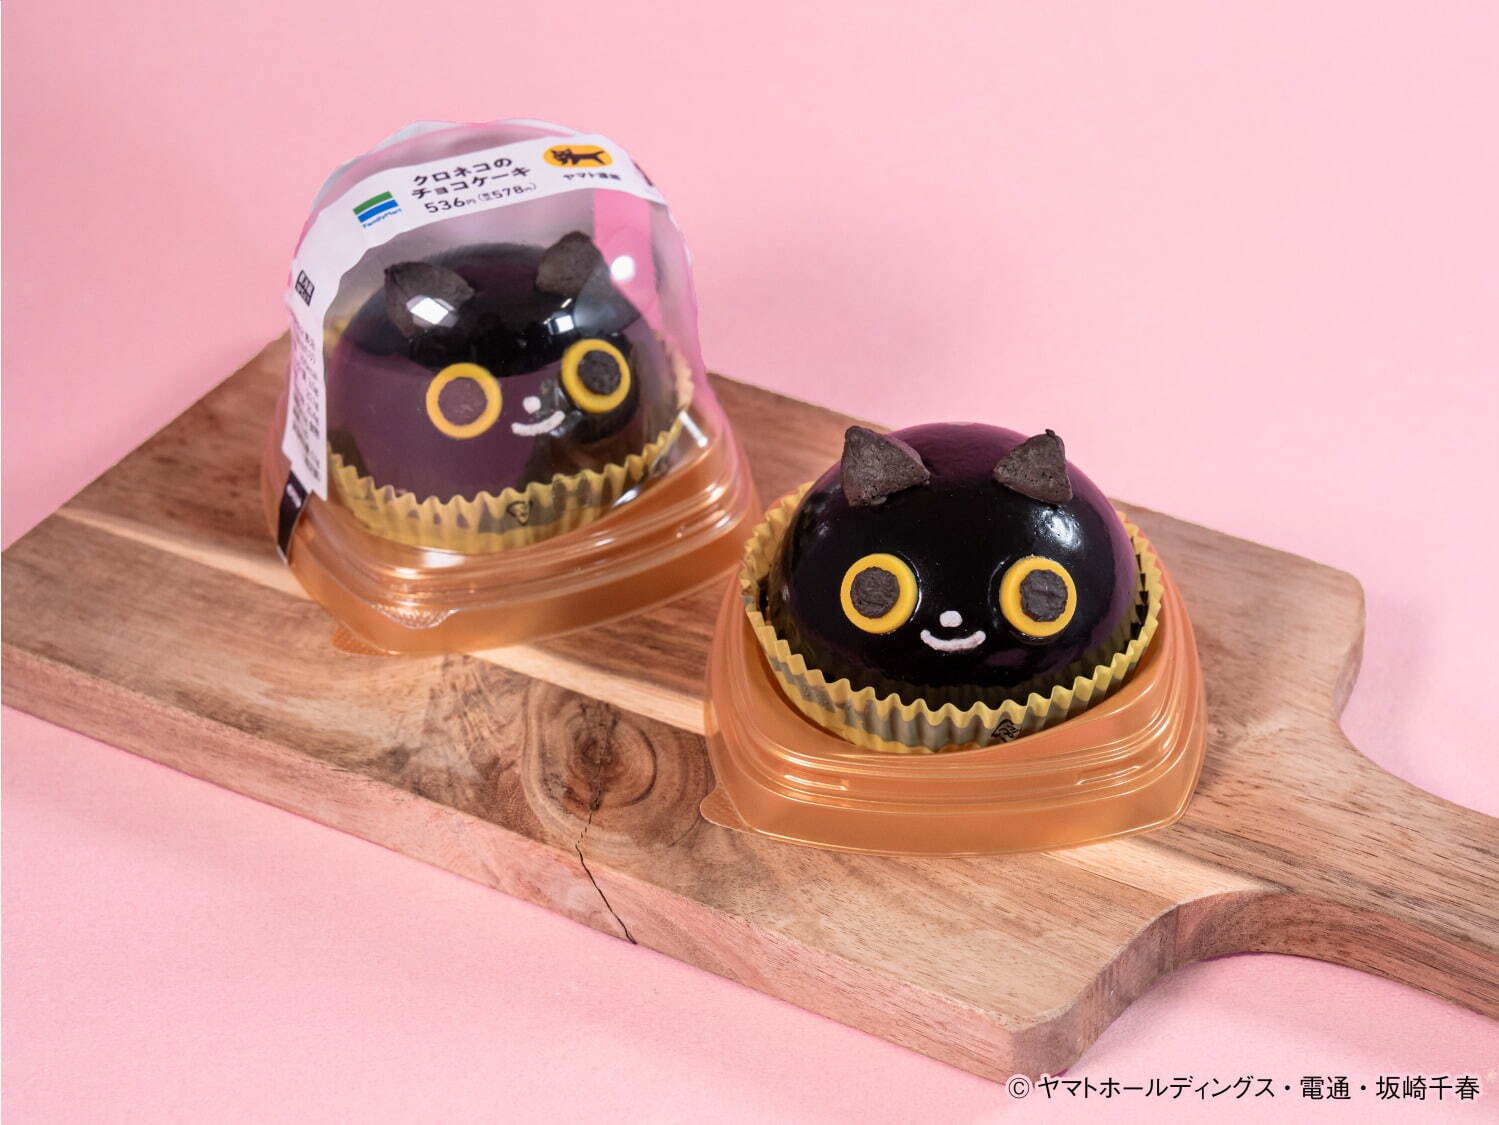 Family Mart Cat Day Sweets